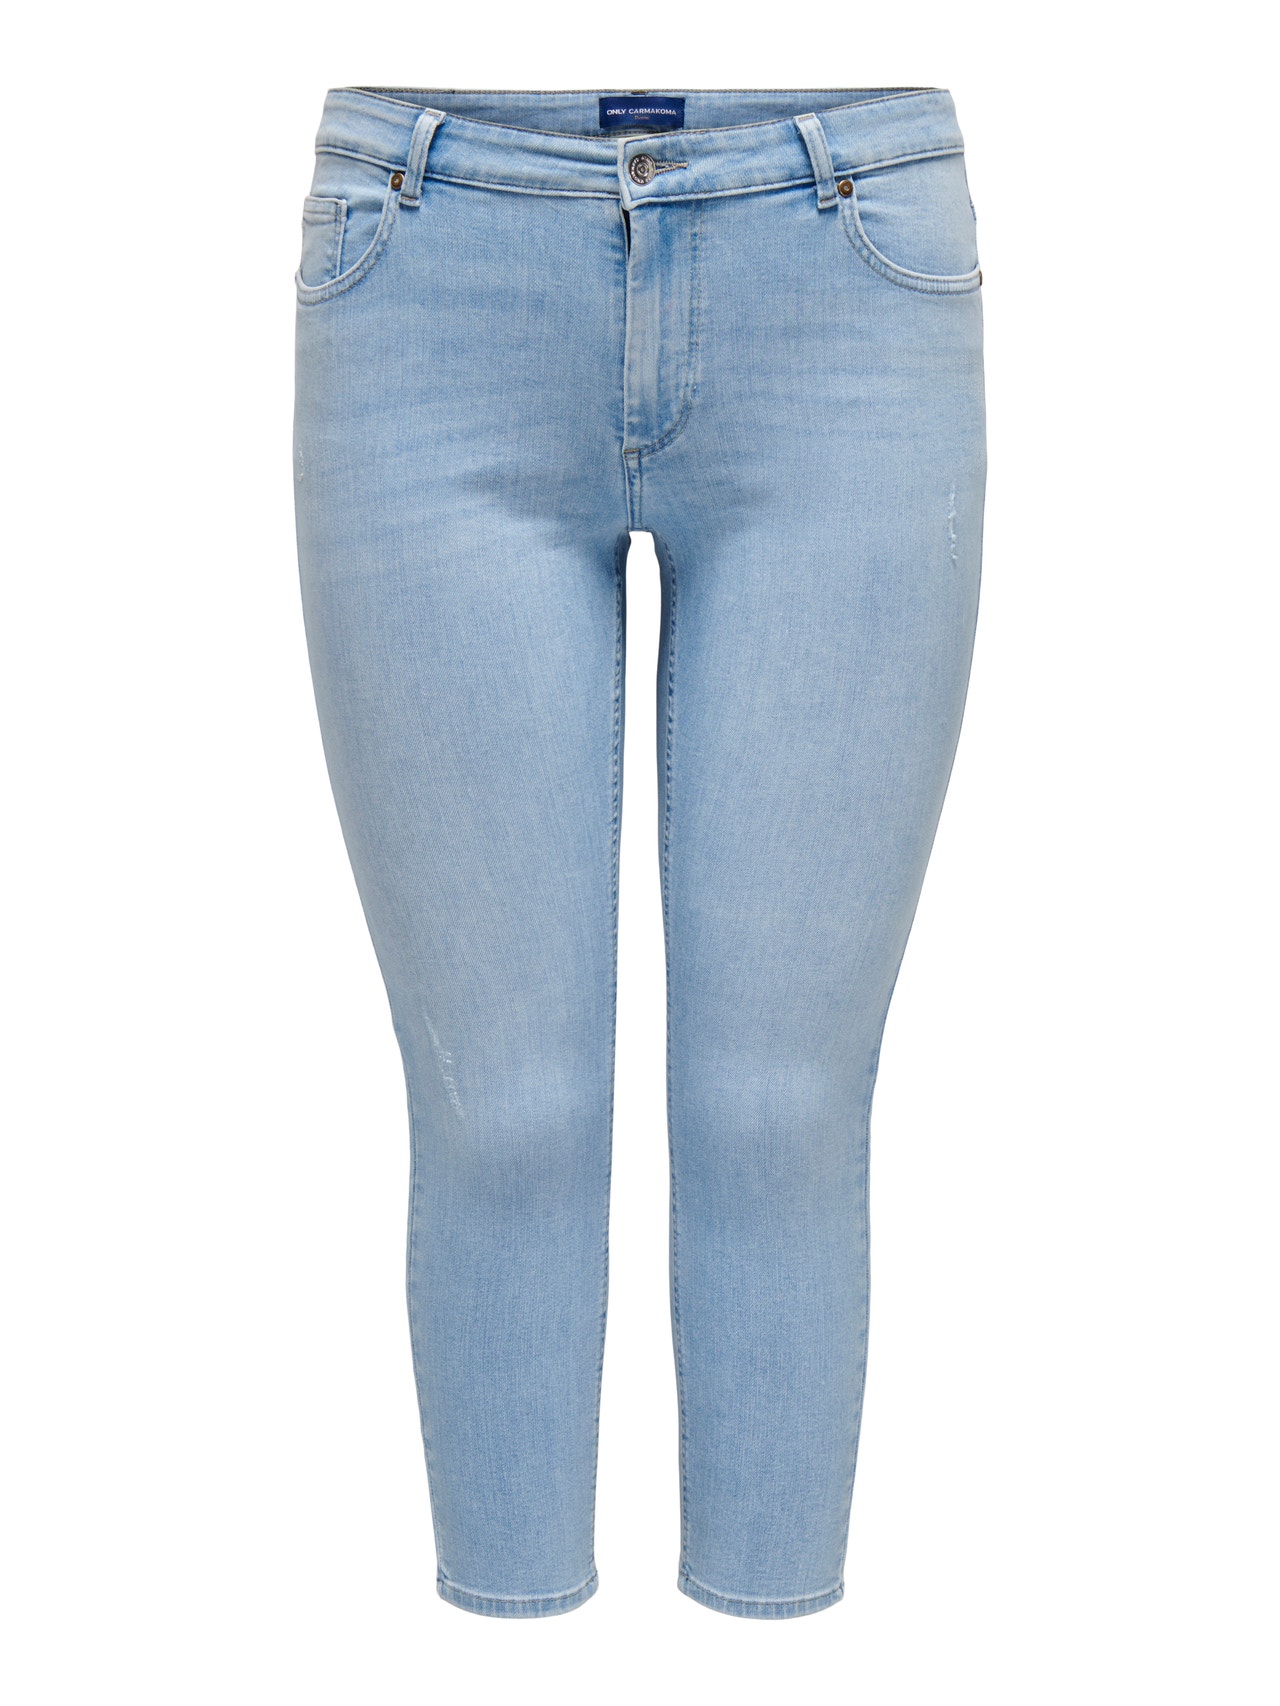 ONLY Jeans Skinny Fit Taille classique -Light Blue Denim - 15284647